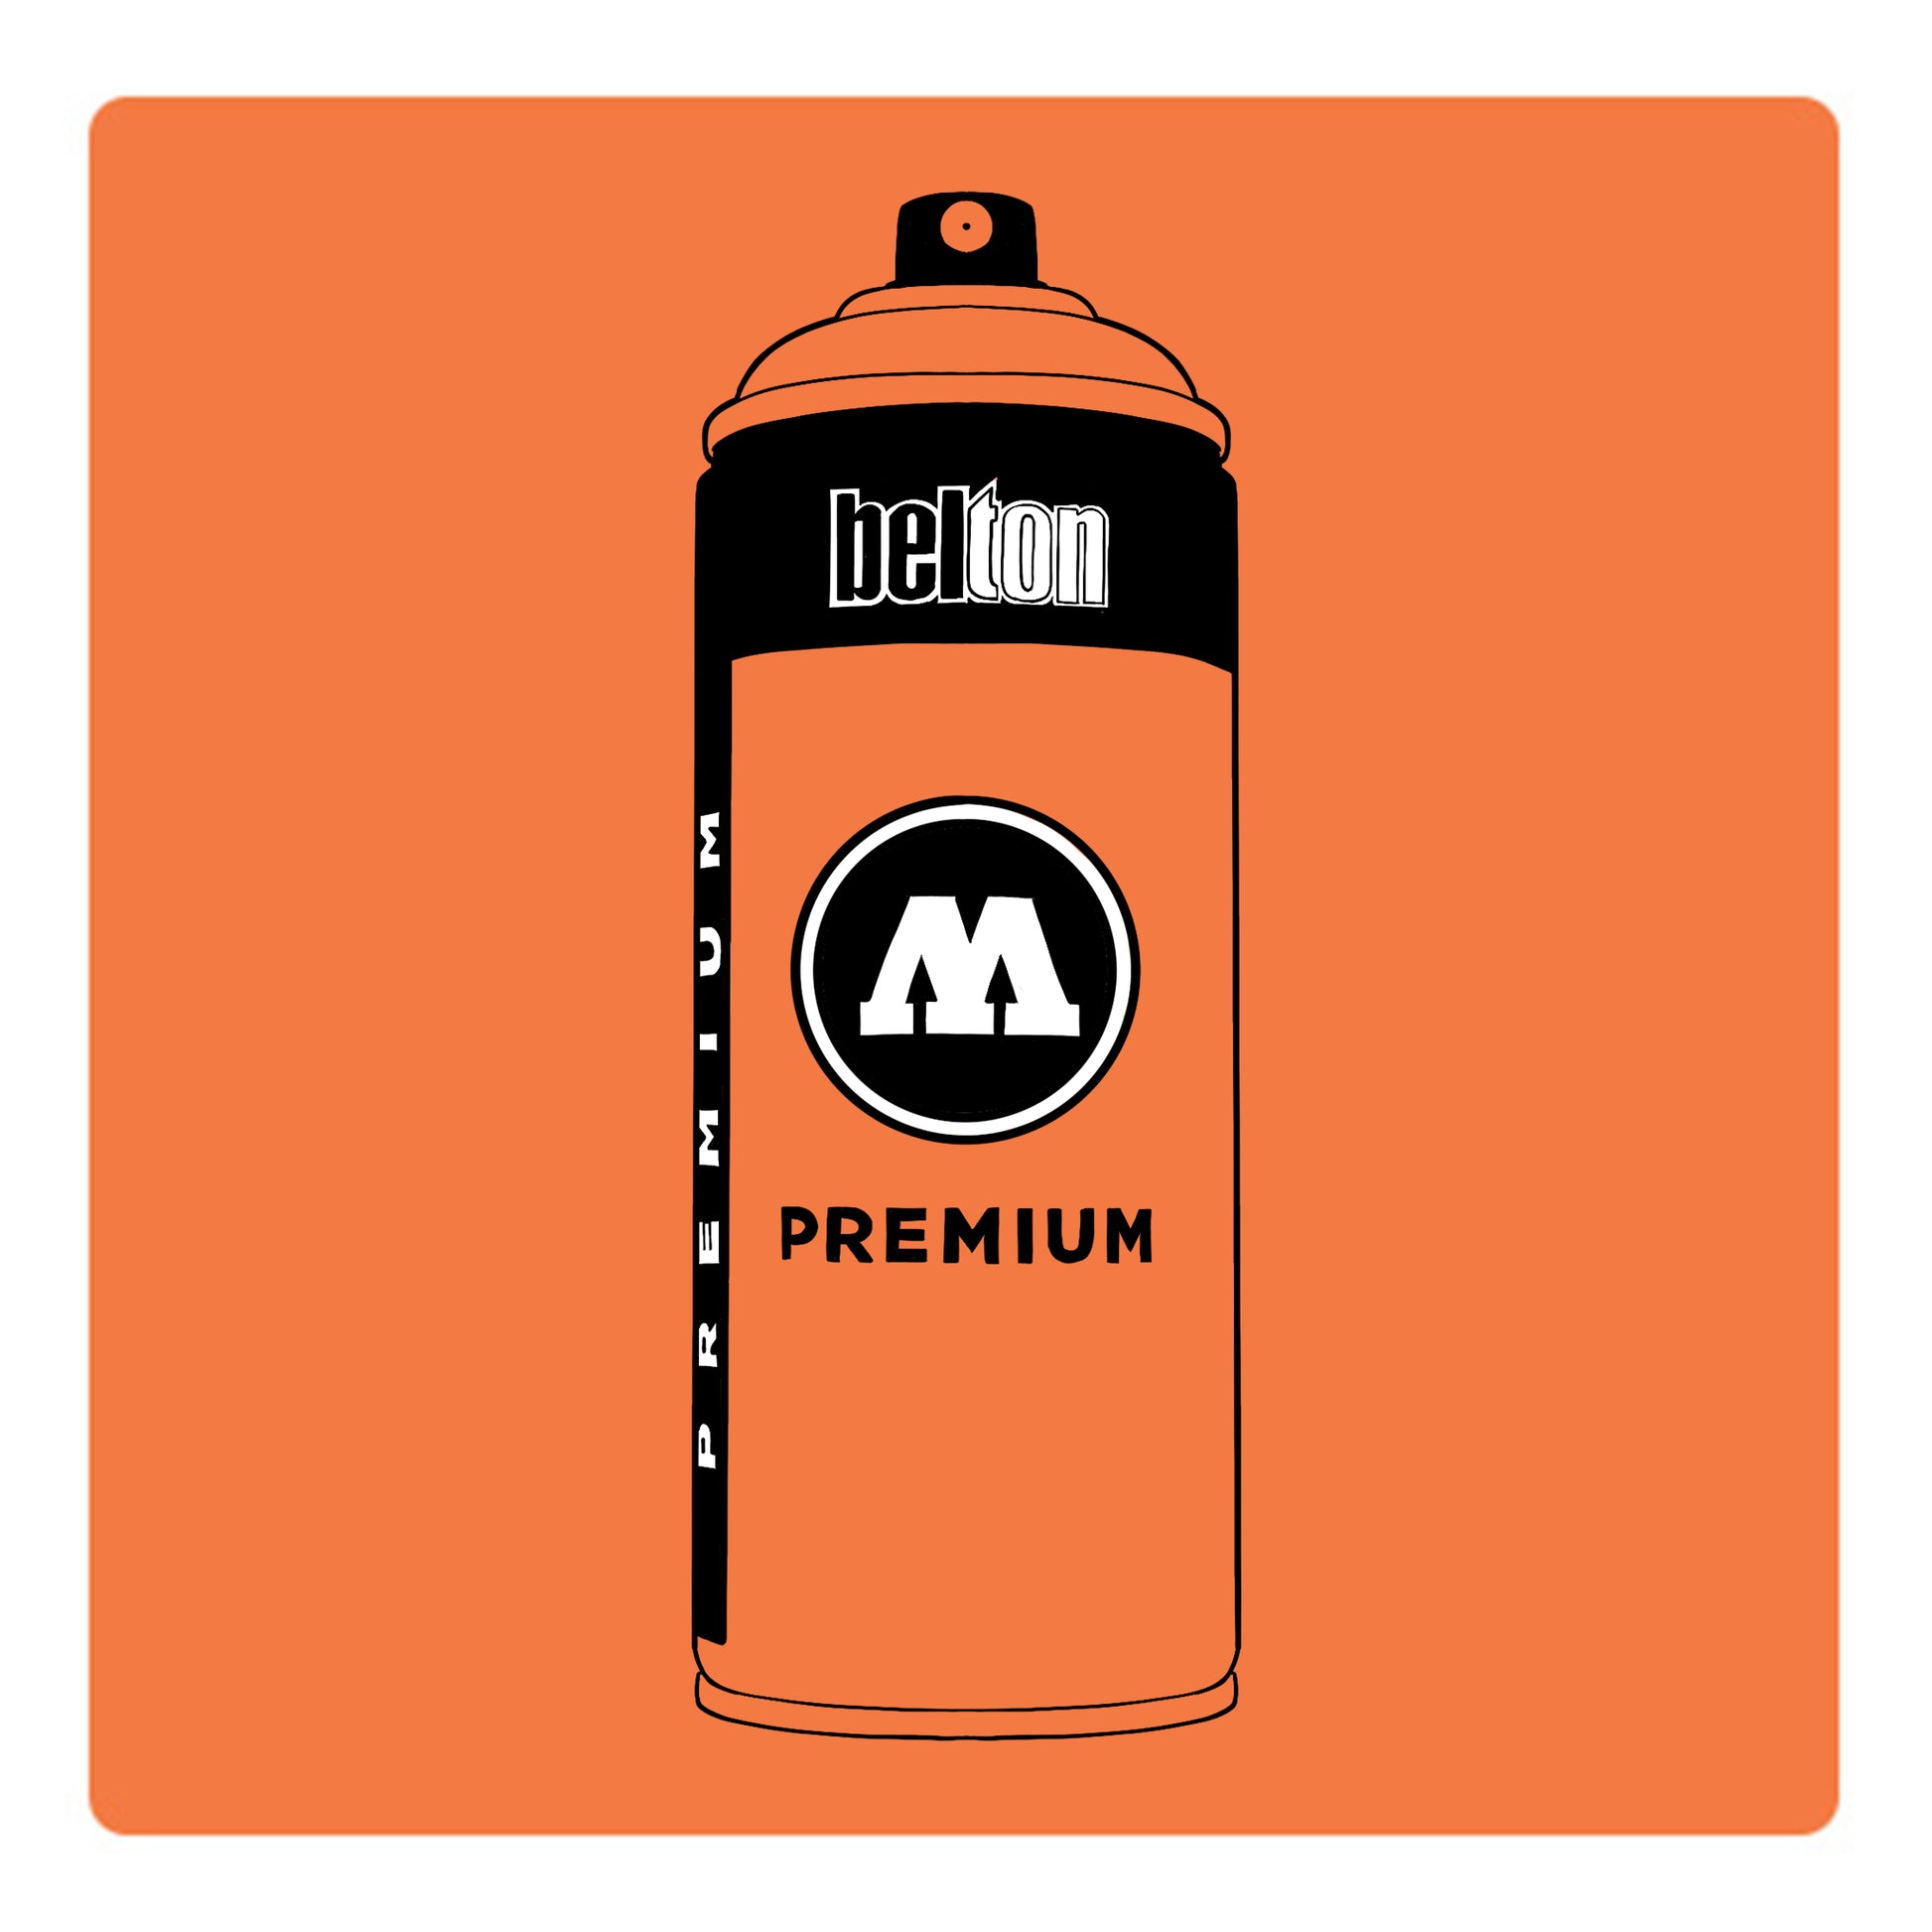 A black outline drawing of a orange spray paint can with the words "belton","premium" and the letter"M" written on the face in black and white font. The background is a color swatch of the same orange with a white border.